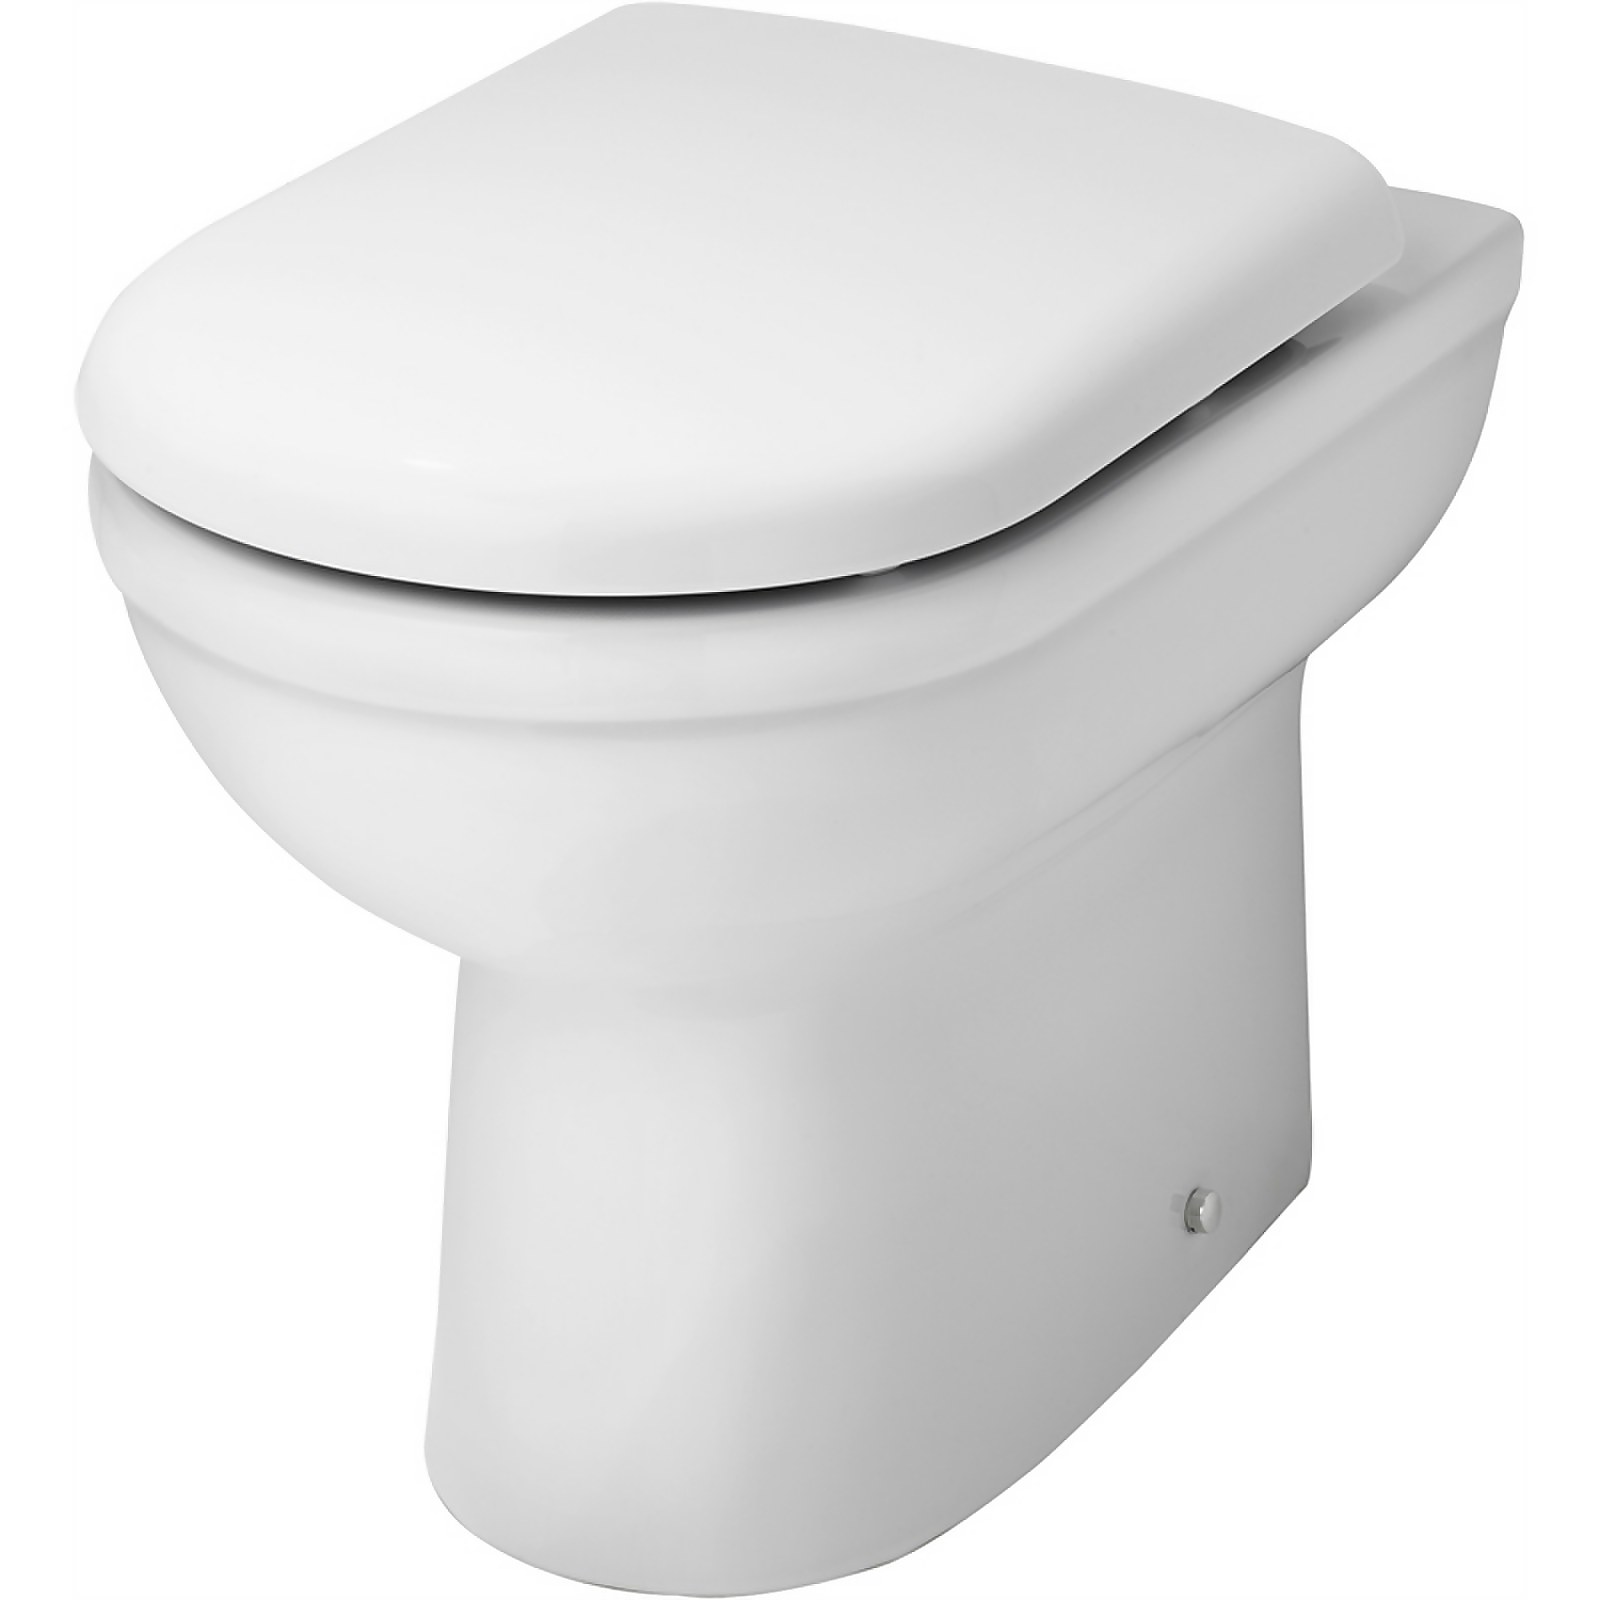 Photo of Balterley Vito Comfort Height Btw Pan And Soft Close Toilet Seat